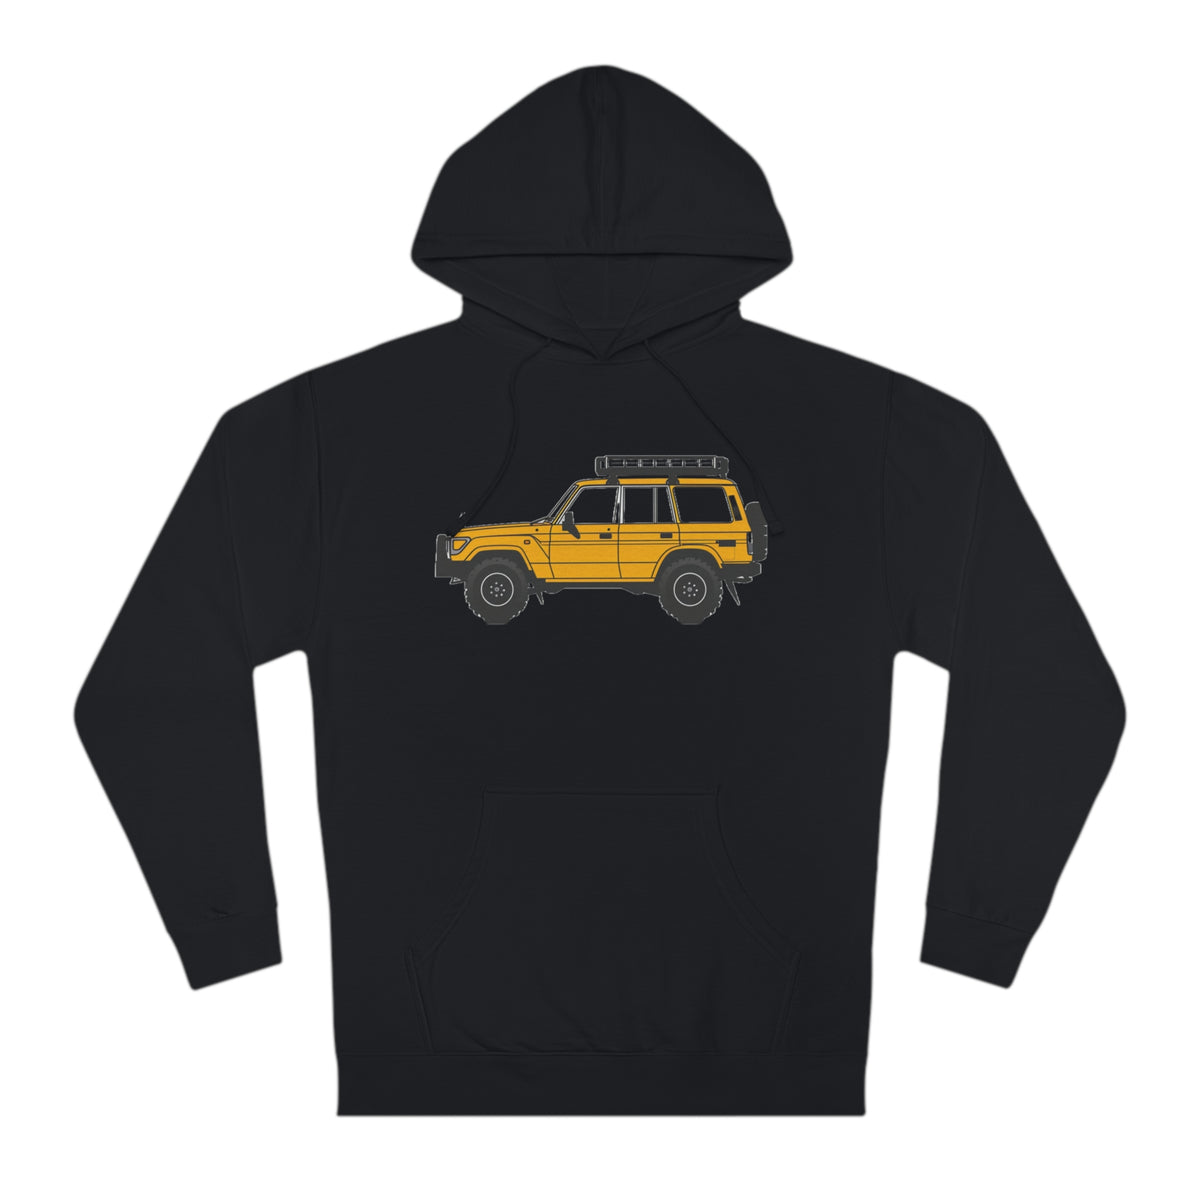 Expedition Elite Men's Hoodie with Classic SUV Graphic Hooded Sweatshirt